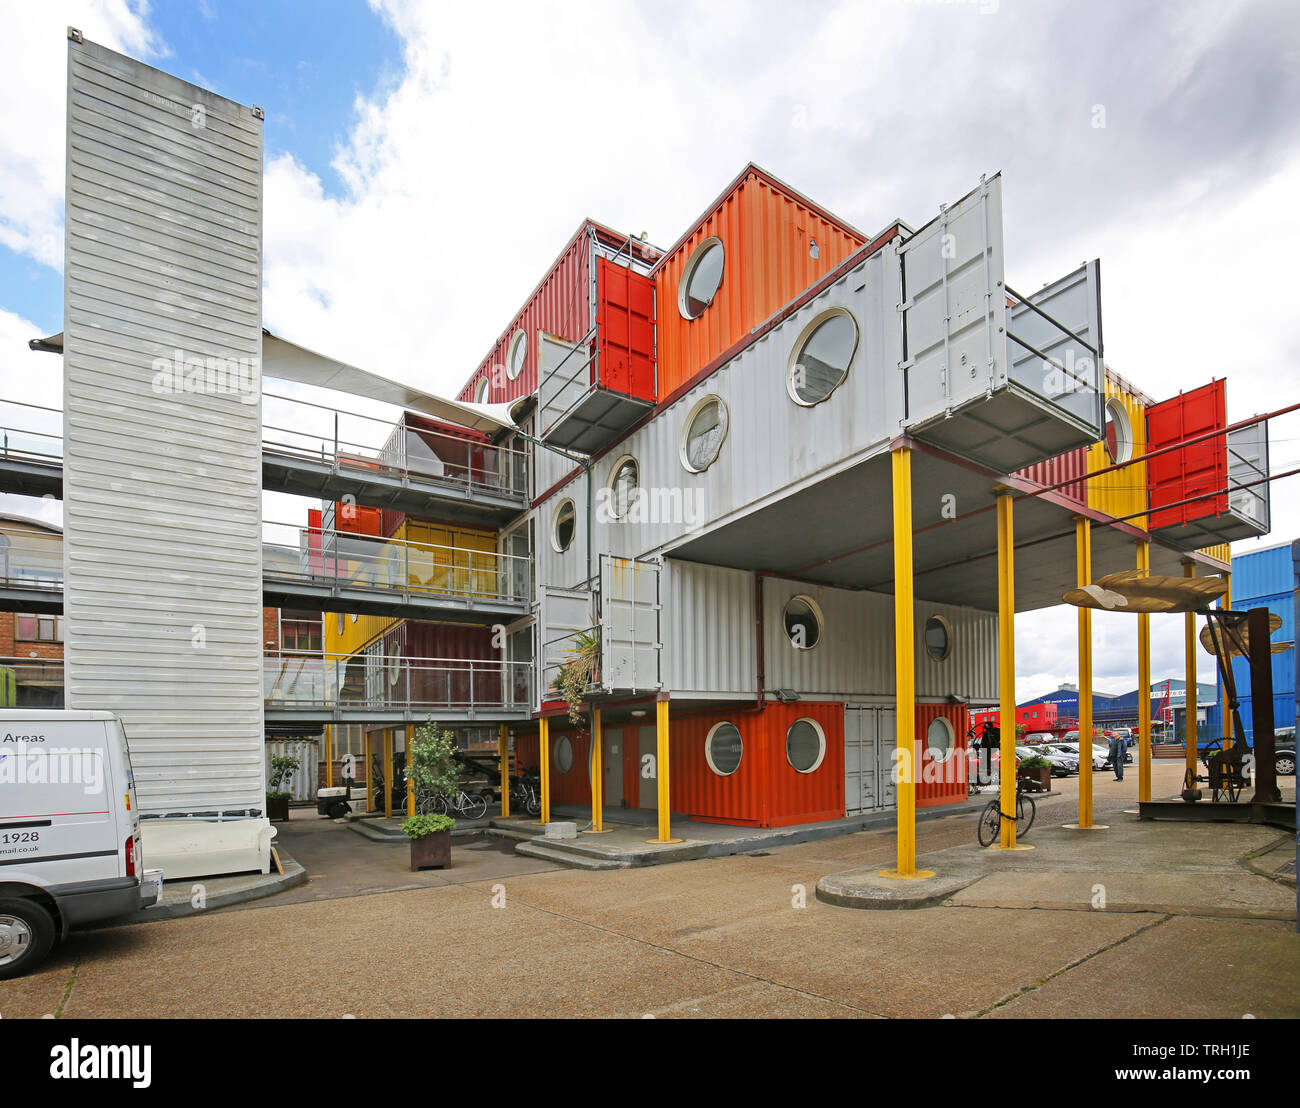 Container City 2 at Trinity Buoy Wharf, London, UK. A collection of live/work spaces constructed from shipping containers. Stock Photo